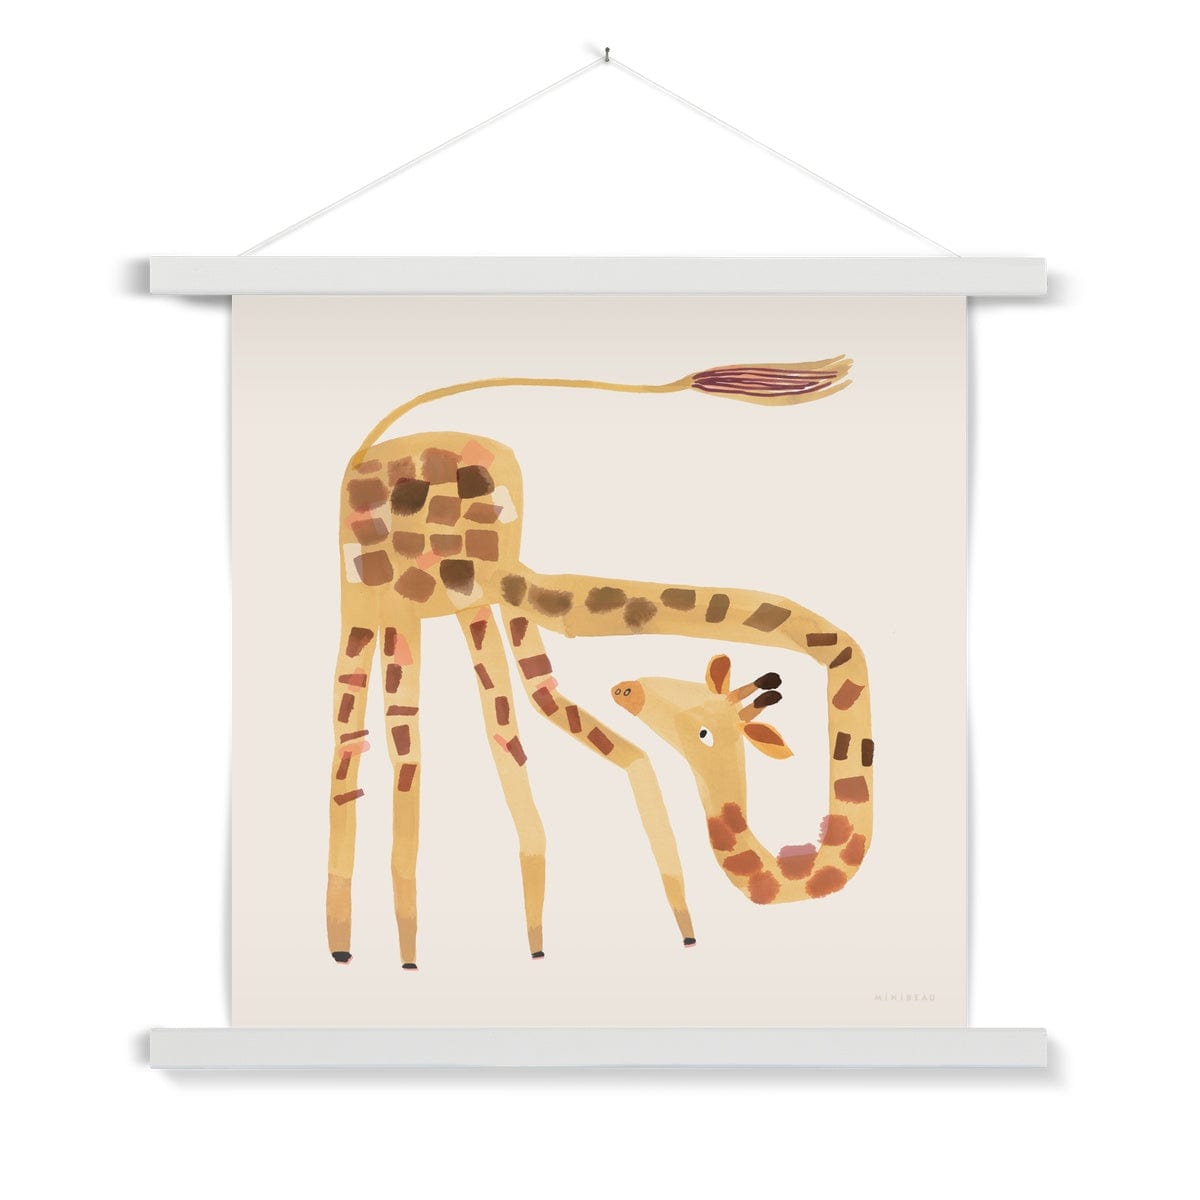 Art print in a white hanger. Our square Giraffe art print shows a cartoon giraffe with it's tail in the air and it's bending neck looking round its shoulders on a neutral background.